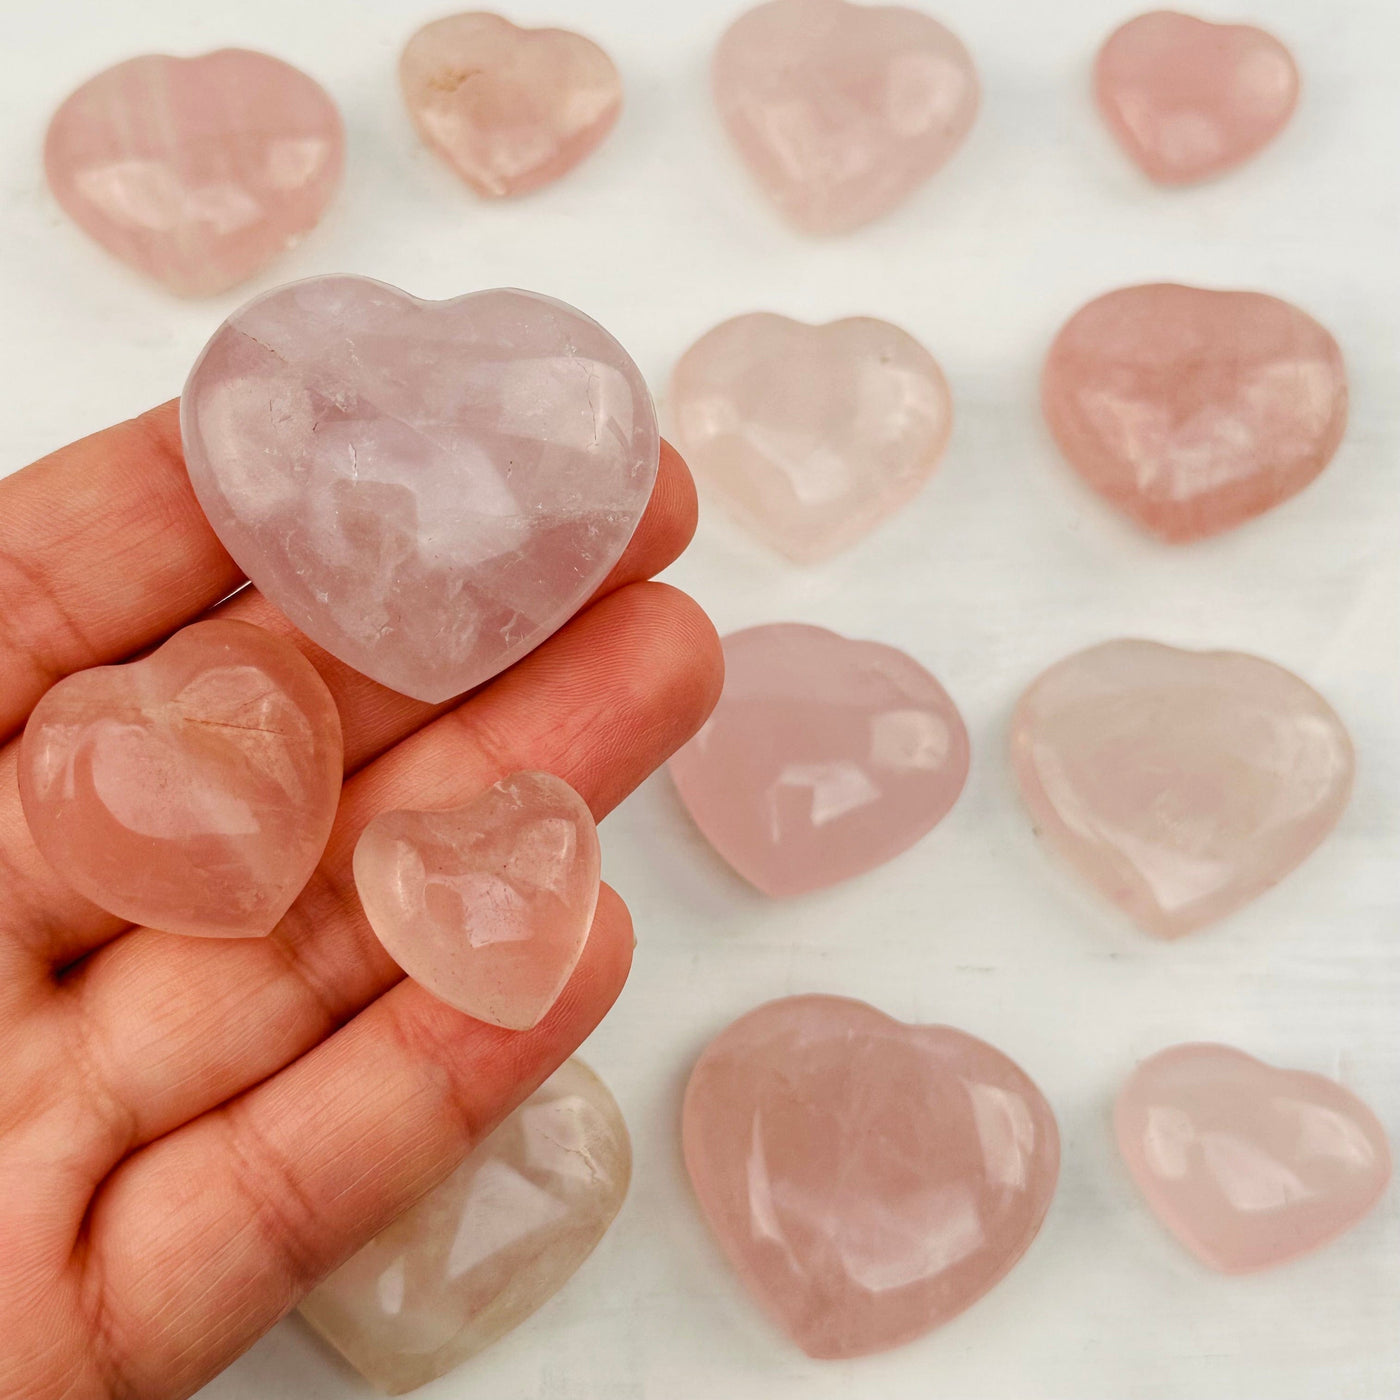 Rose Quartz Hearts in hand for size reference 